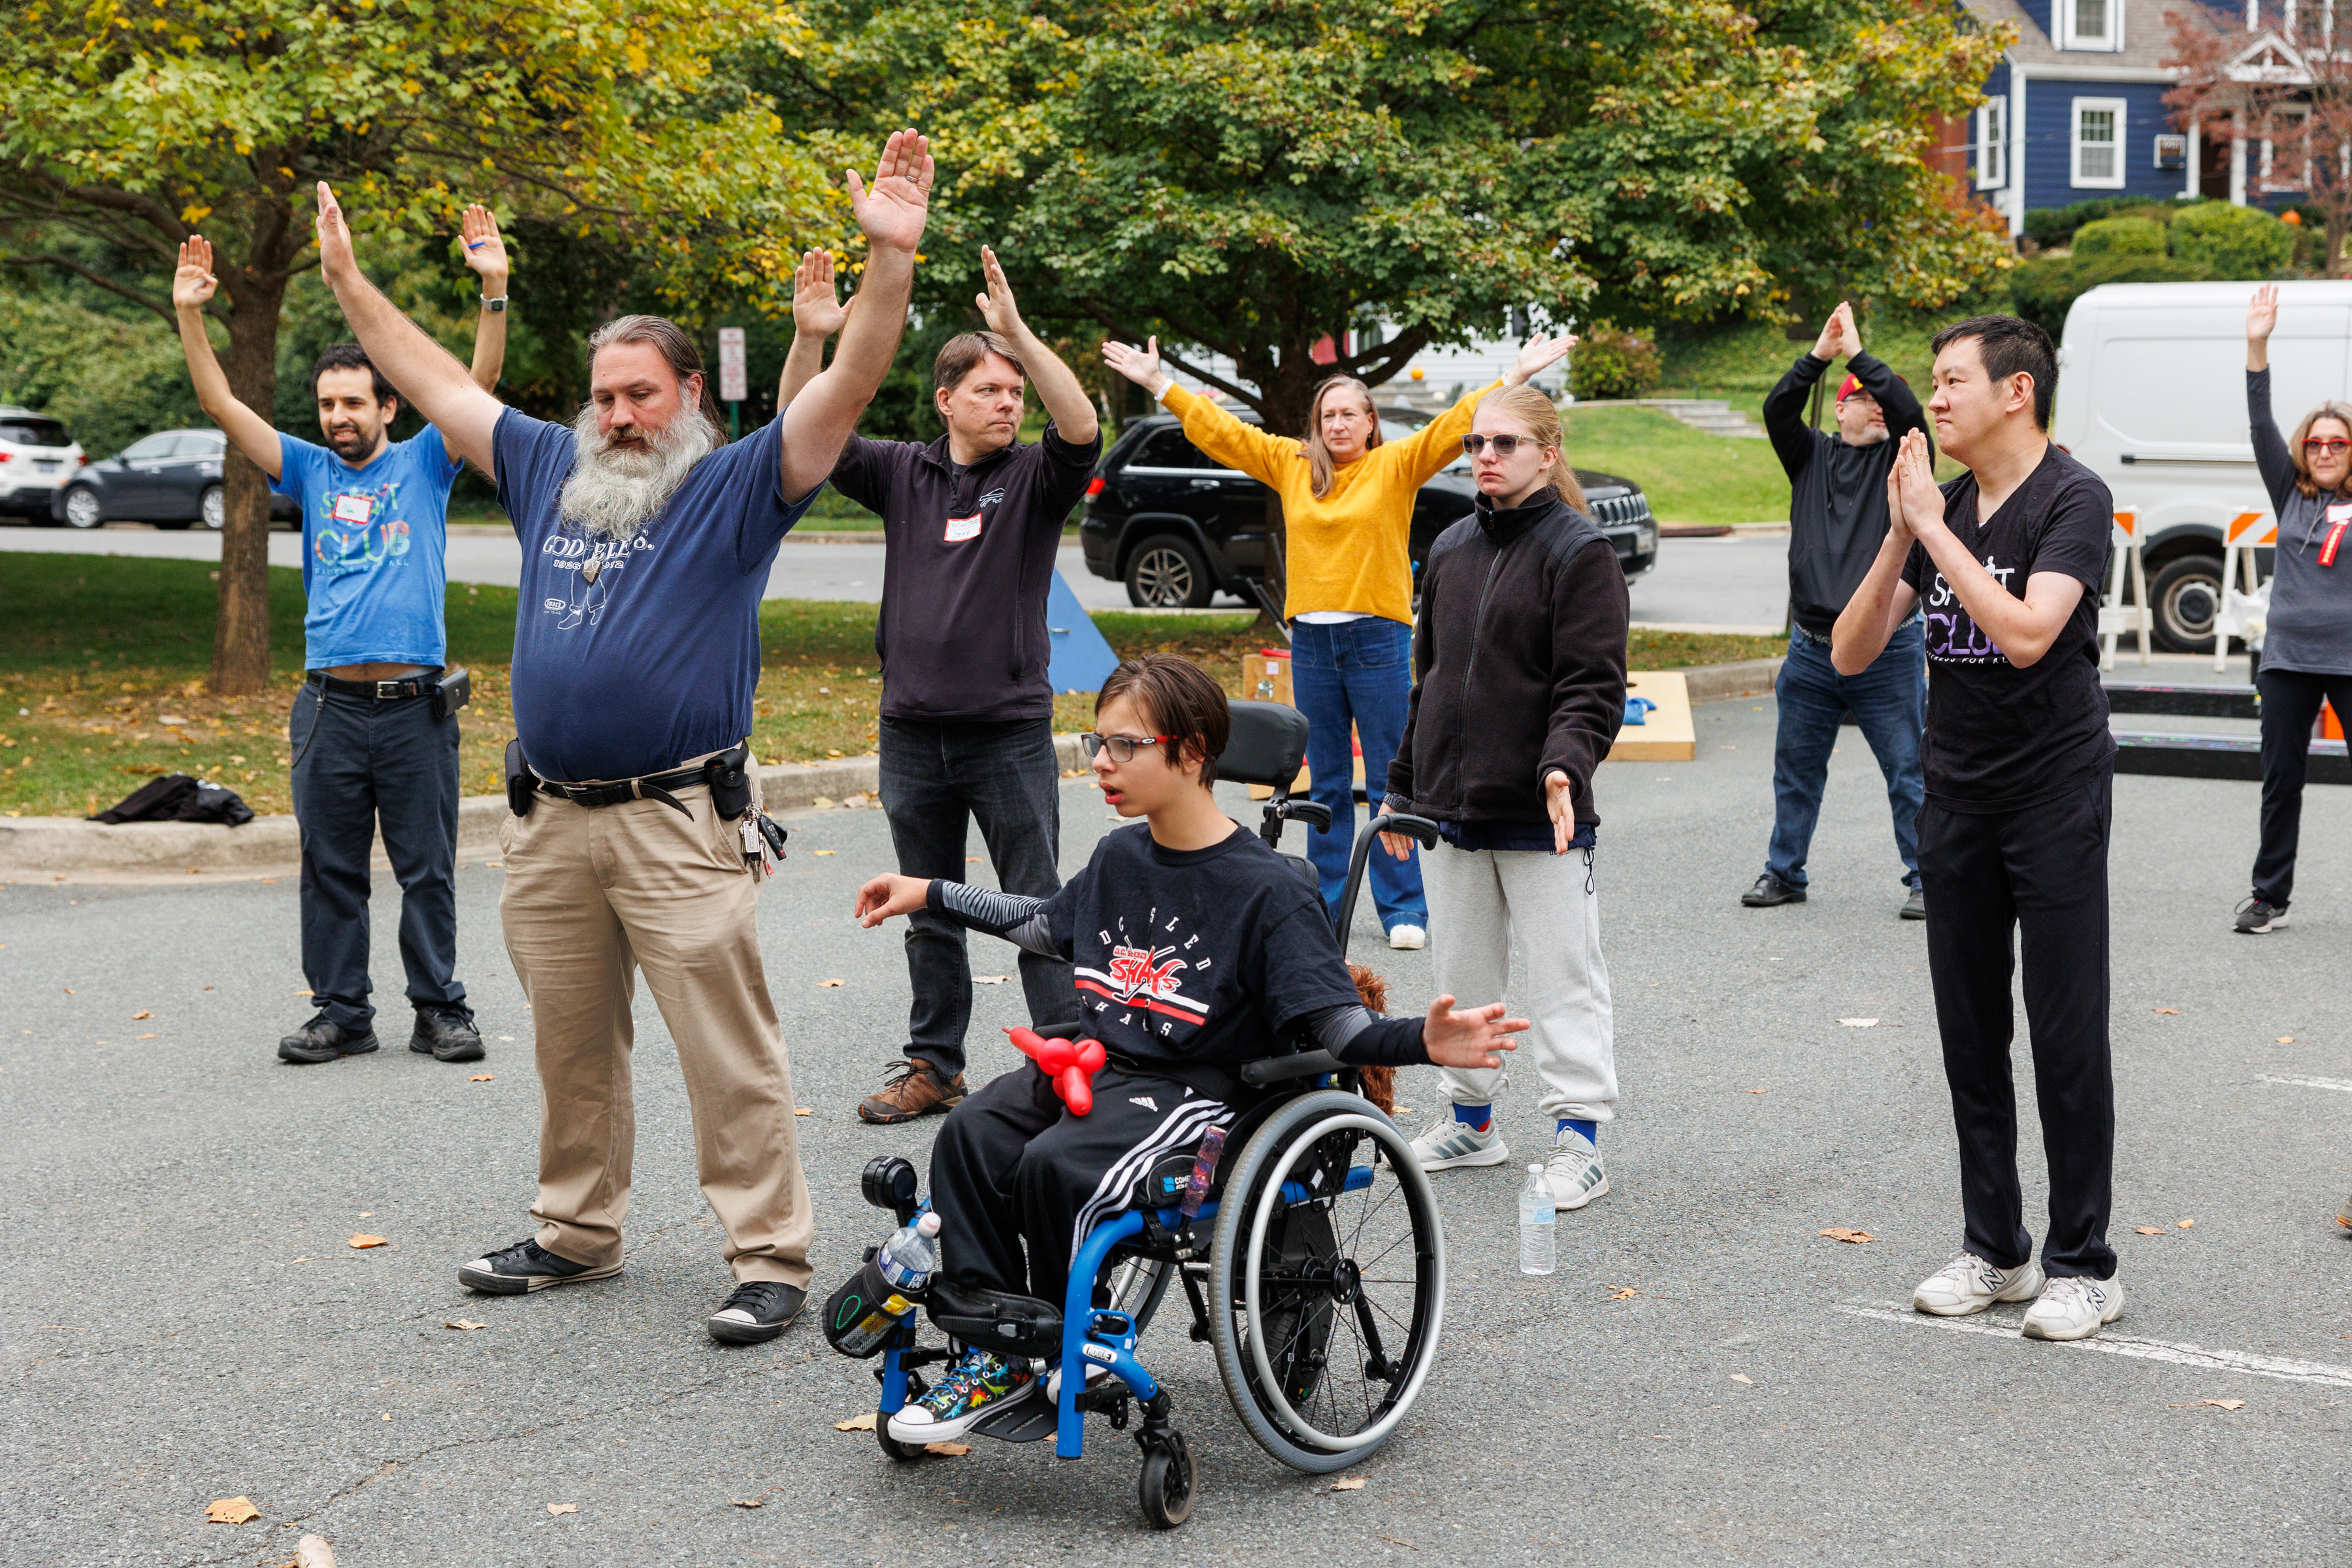 athletes of different abilities stretching in a group setting